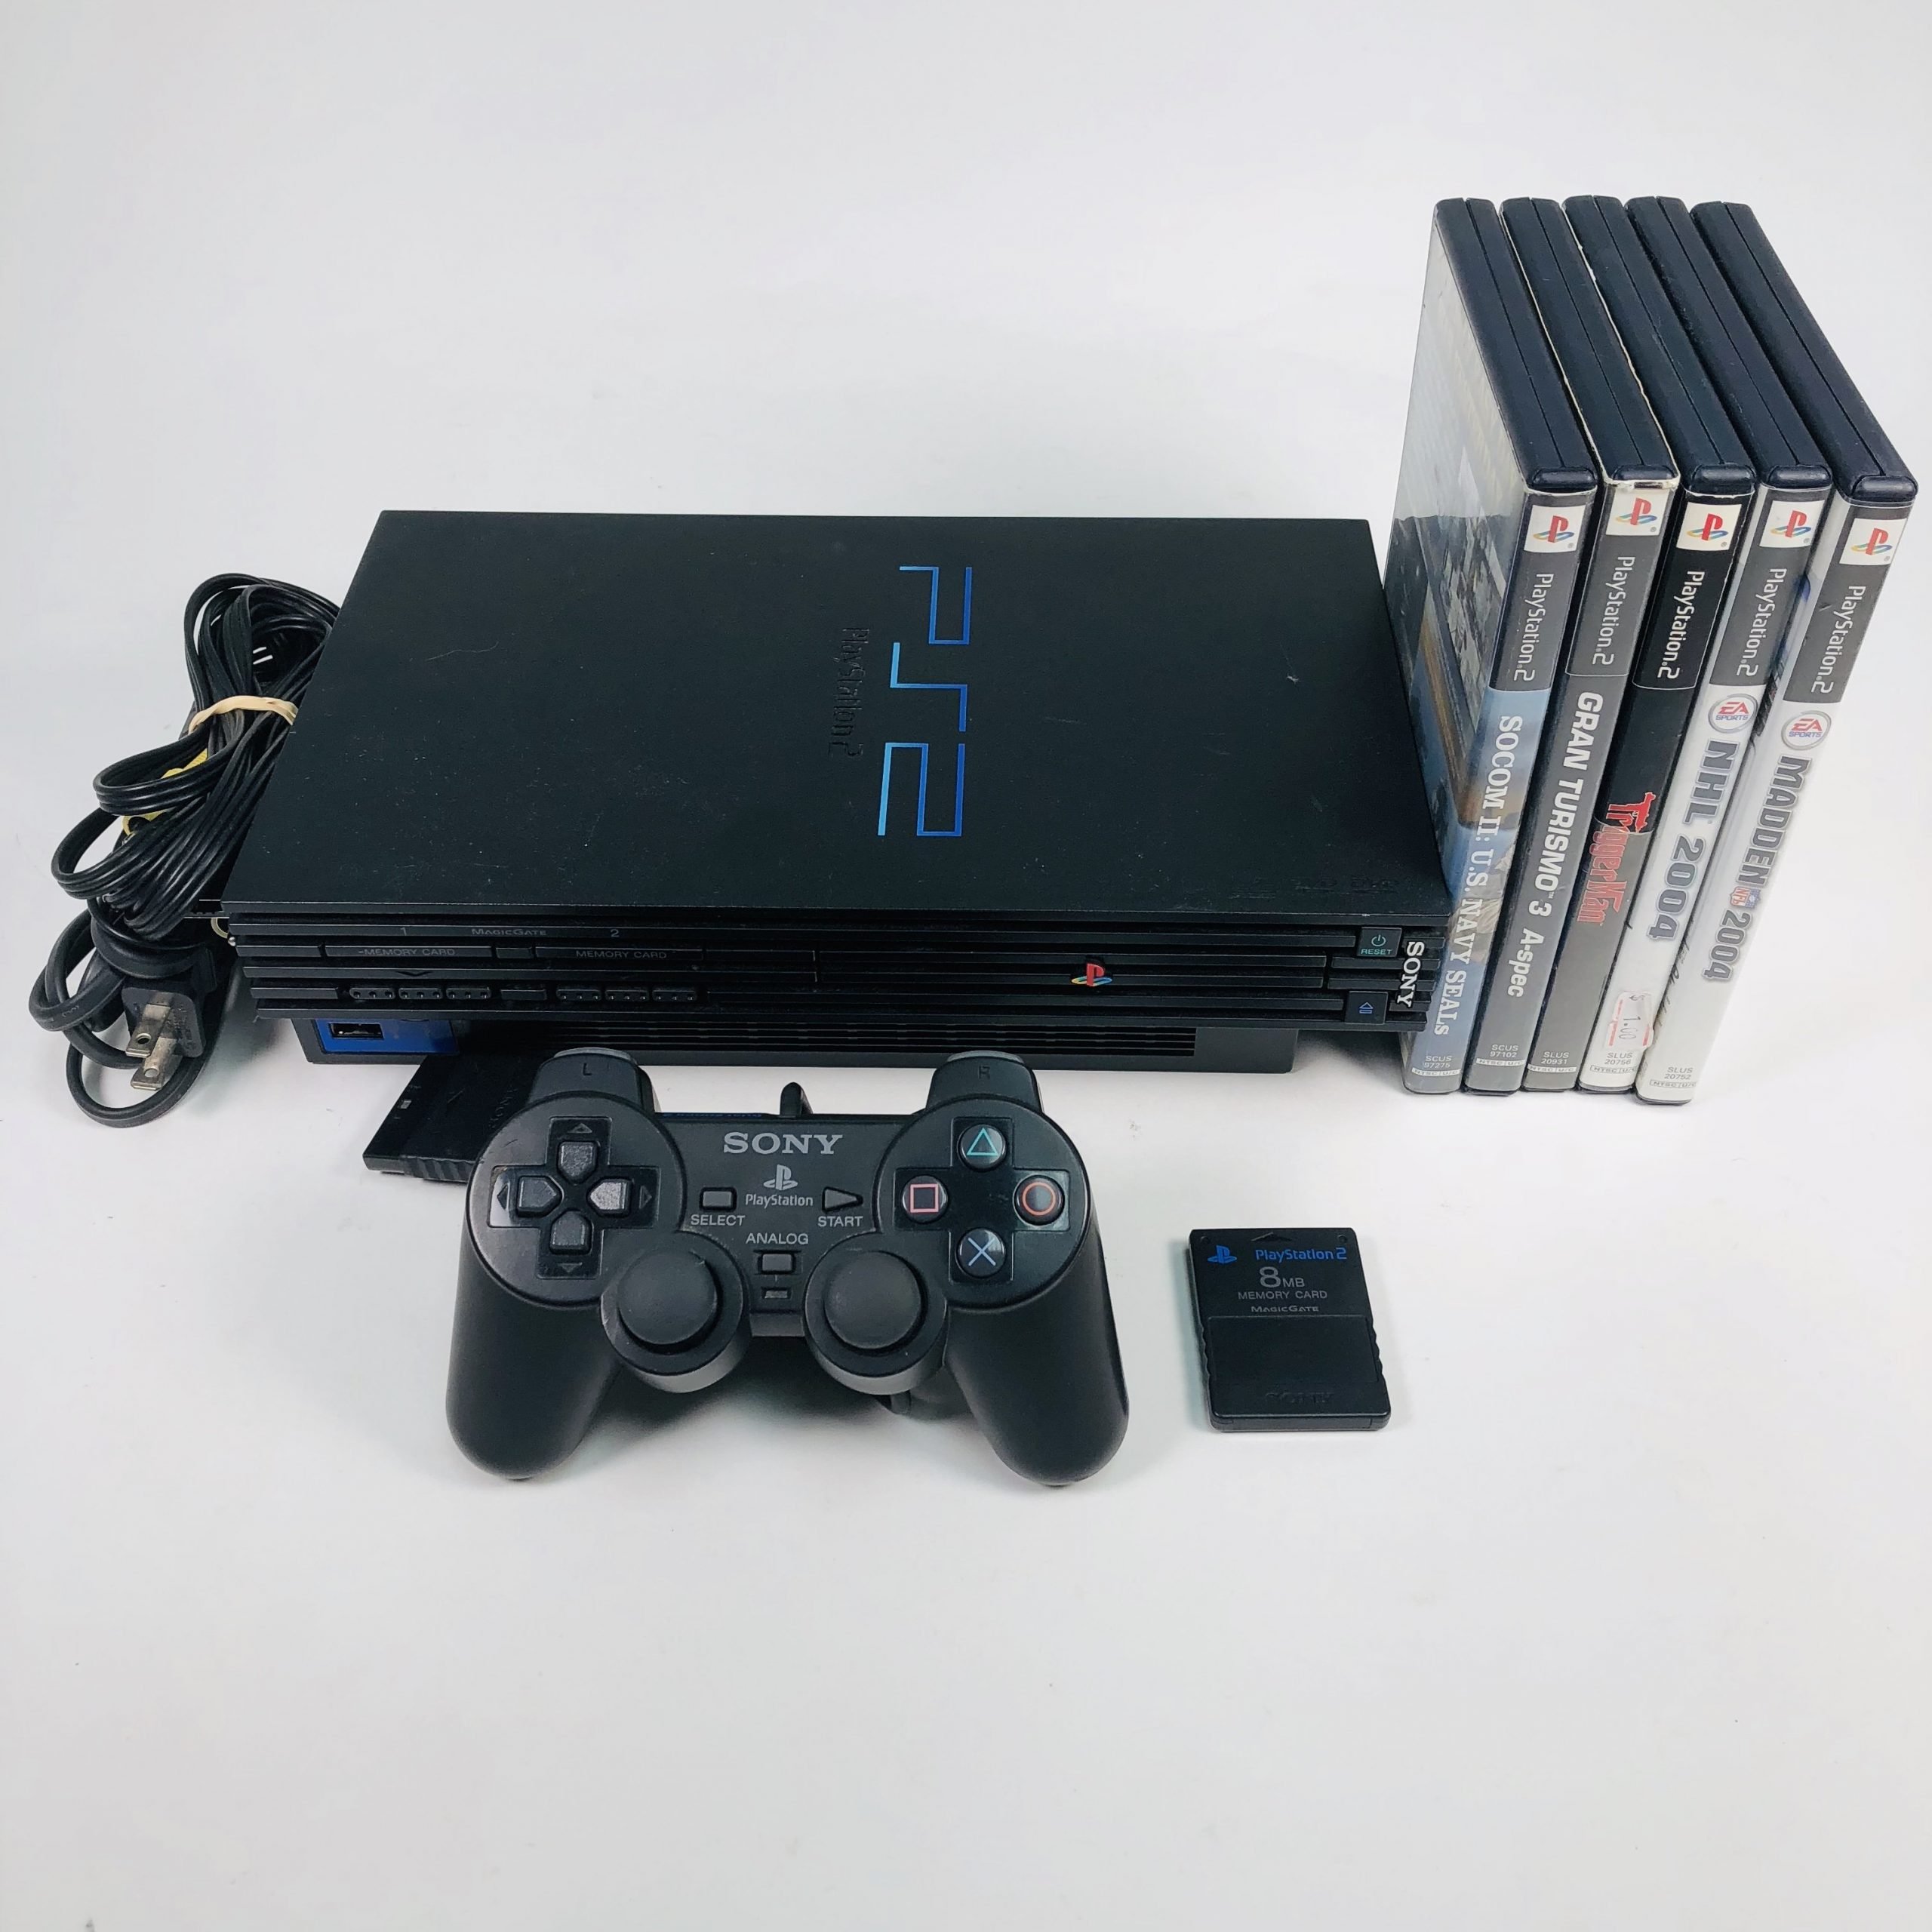 How Much Did The Playstation 2 Cost When It First Came Out ...